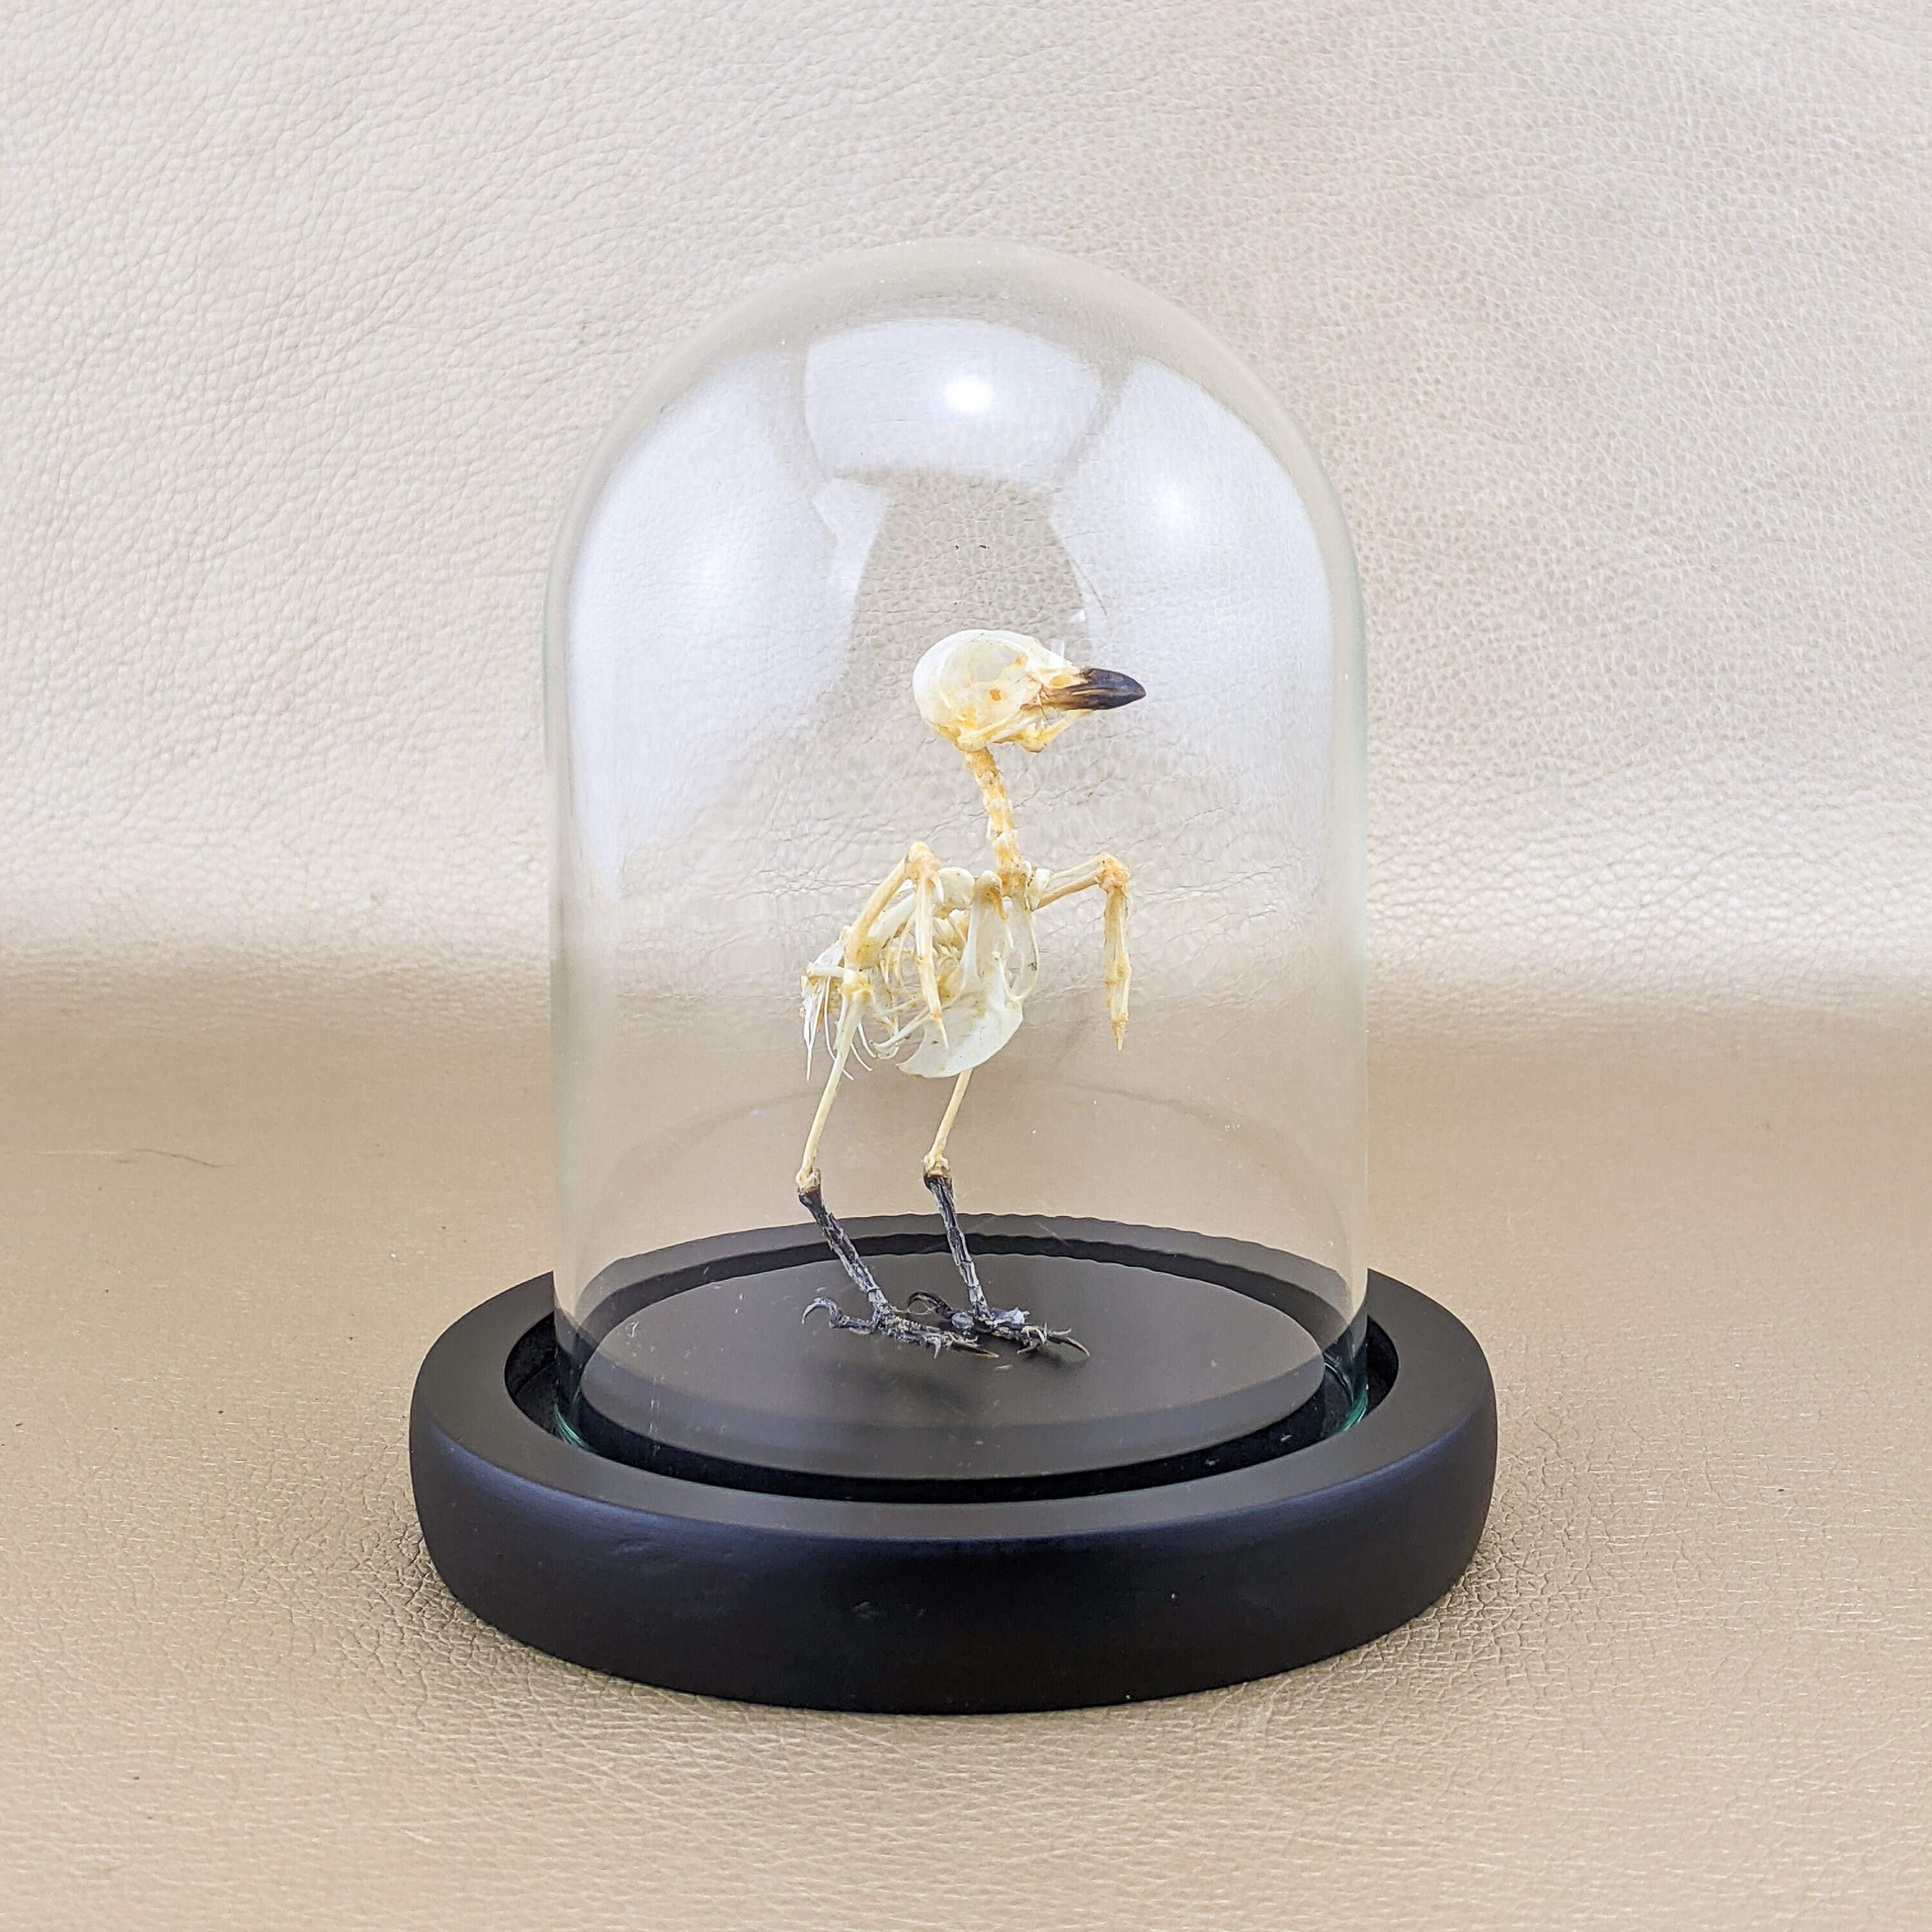 Details about   z45f Taxidermy oddities curiosities real Bee Eater Bird Skull Glass Dome Display 